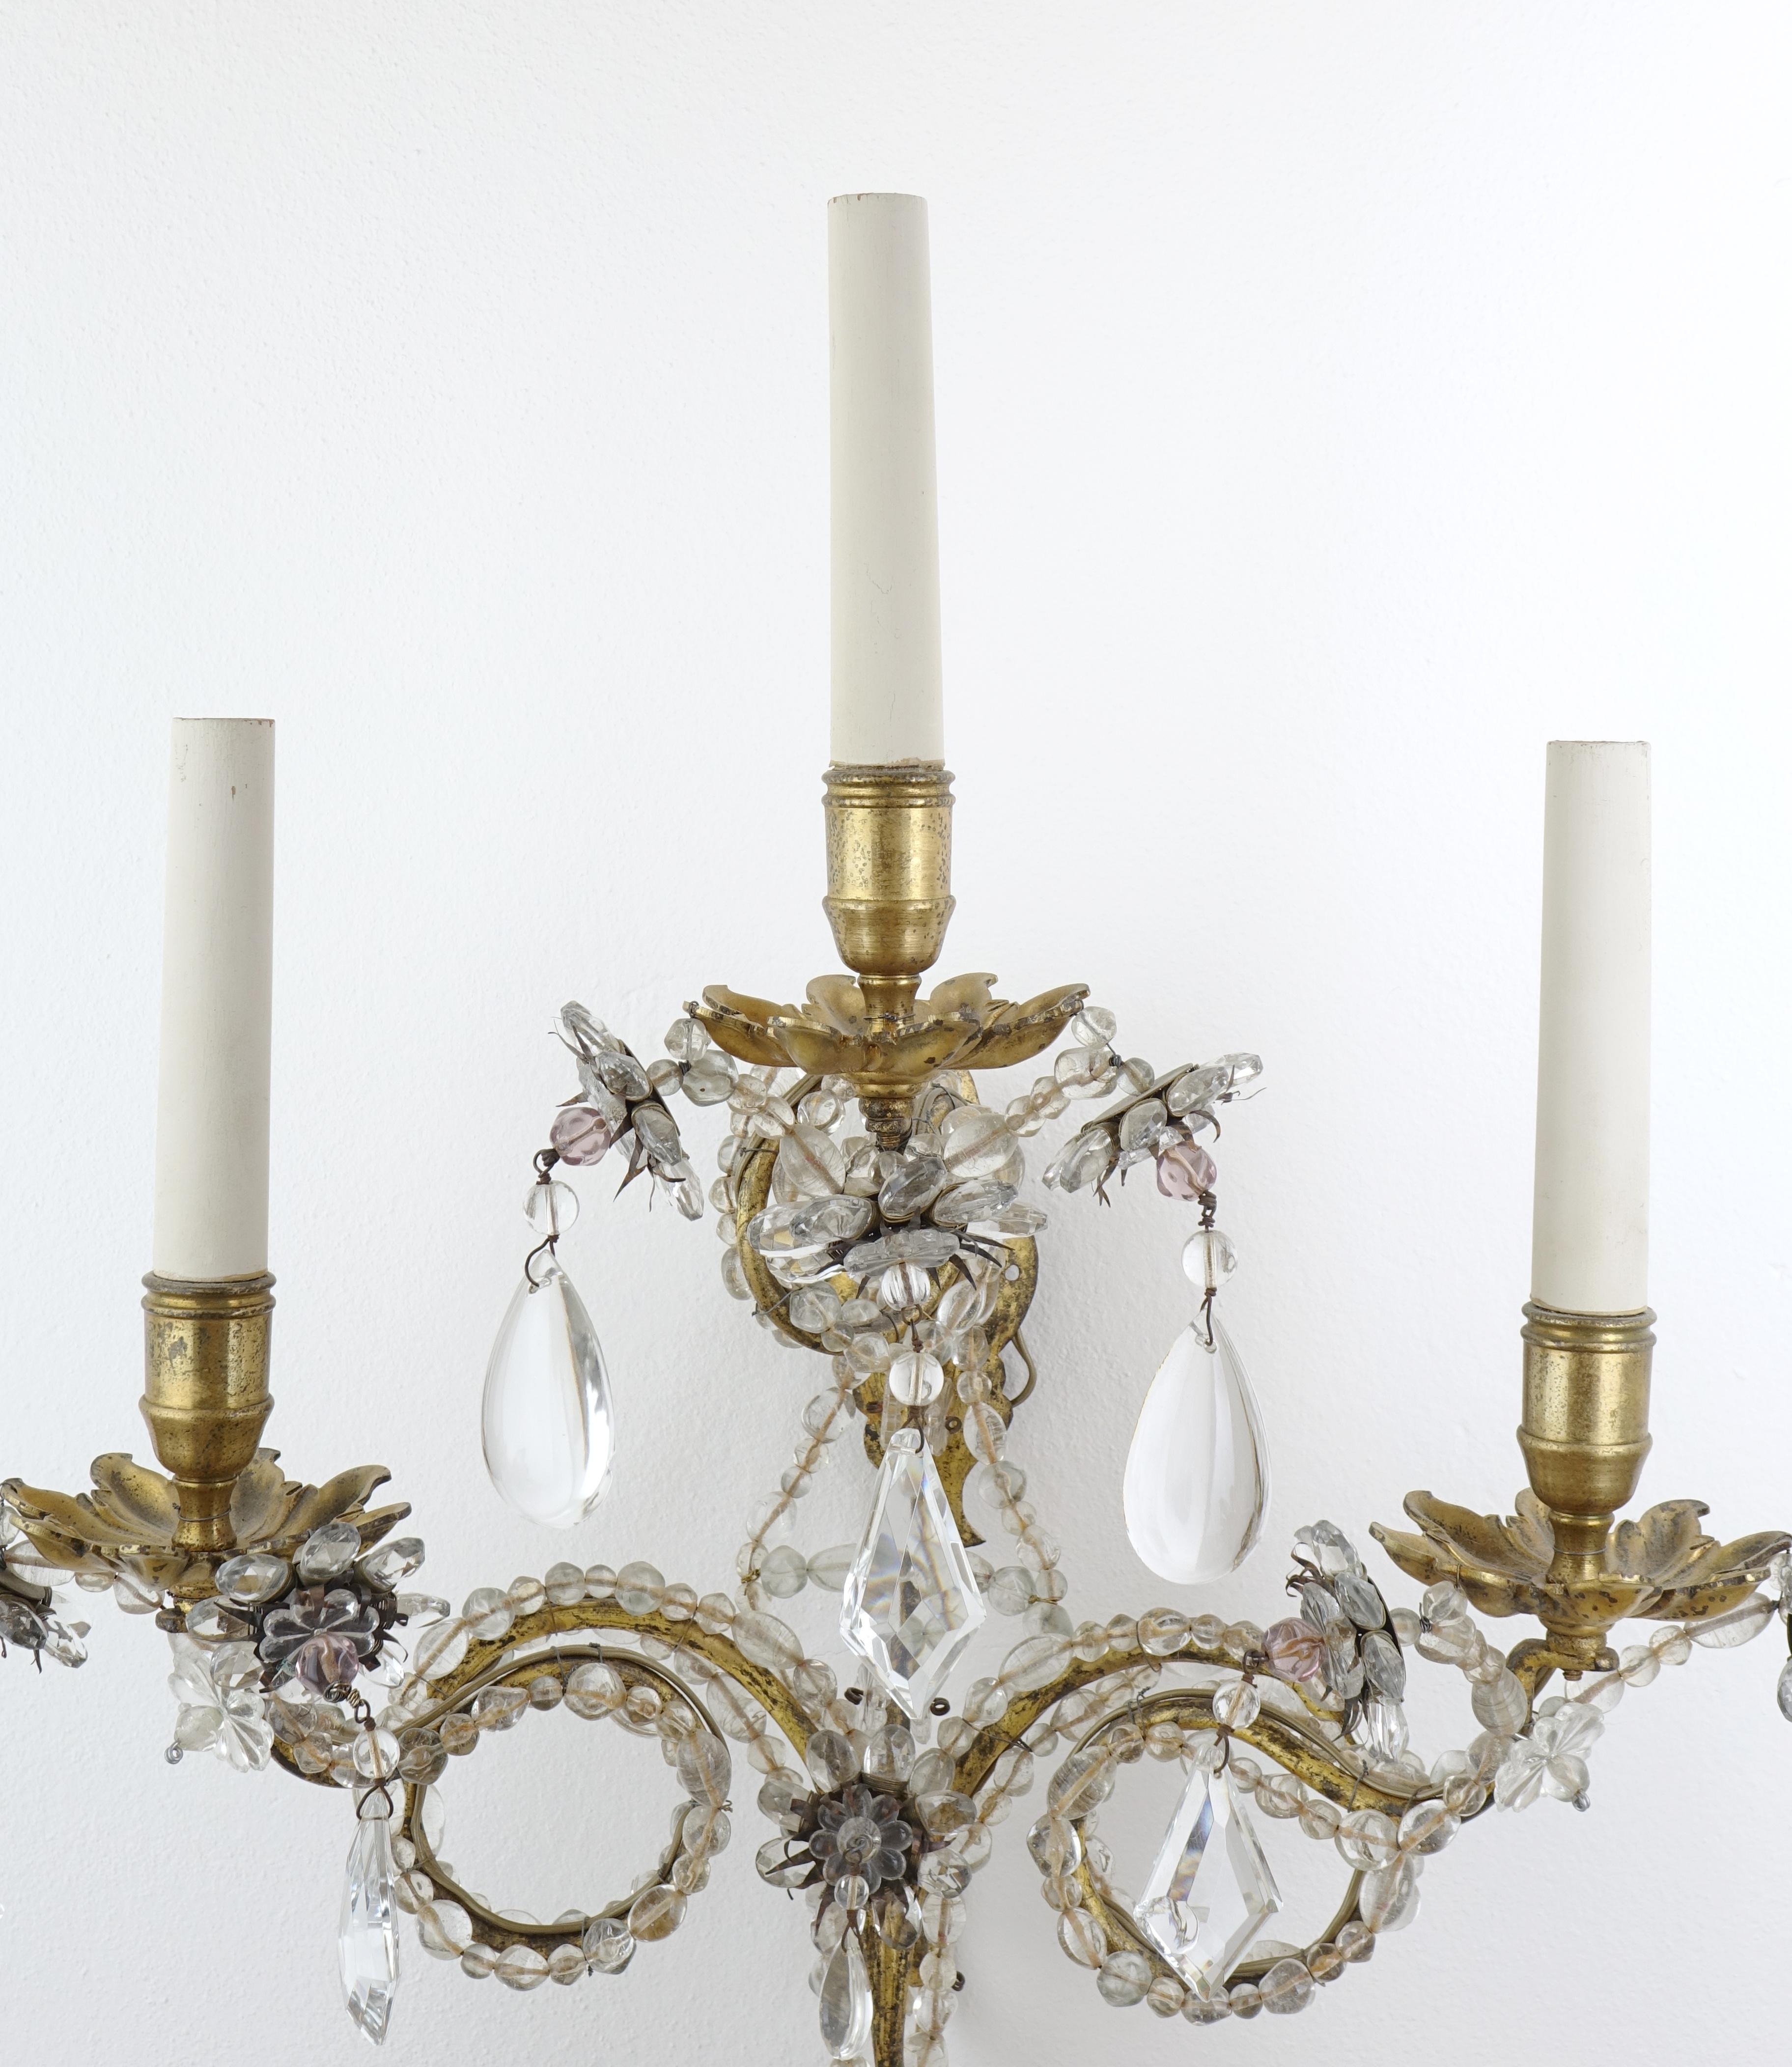 Baroque Crystal 3-Light Wall Lamp on a Golden Frame, Genoa 18th Century For Sale